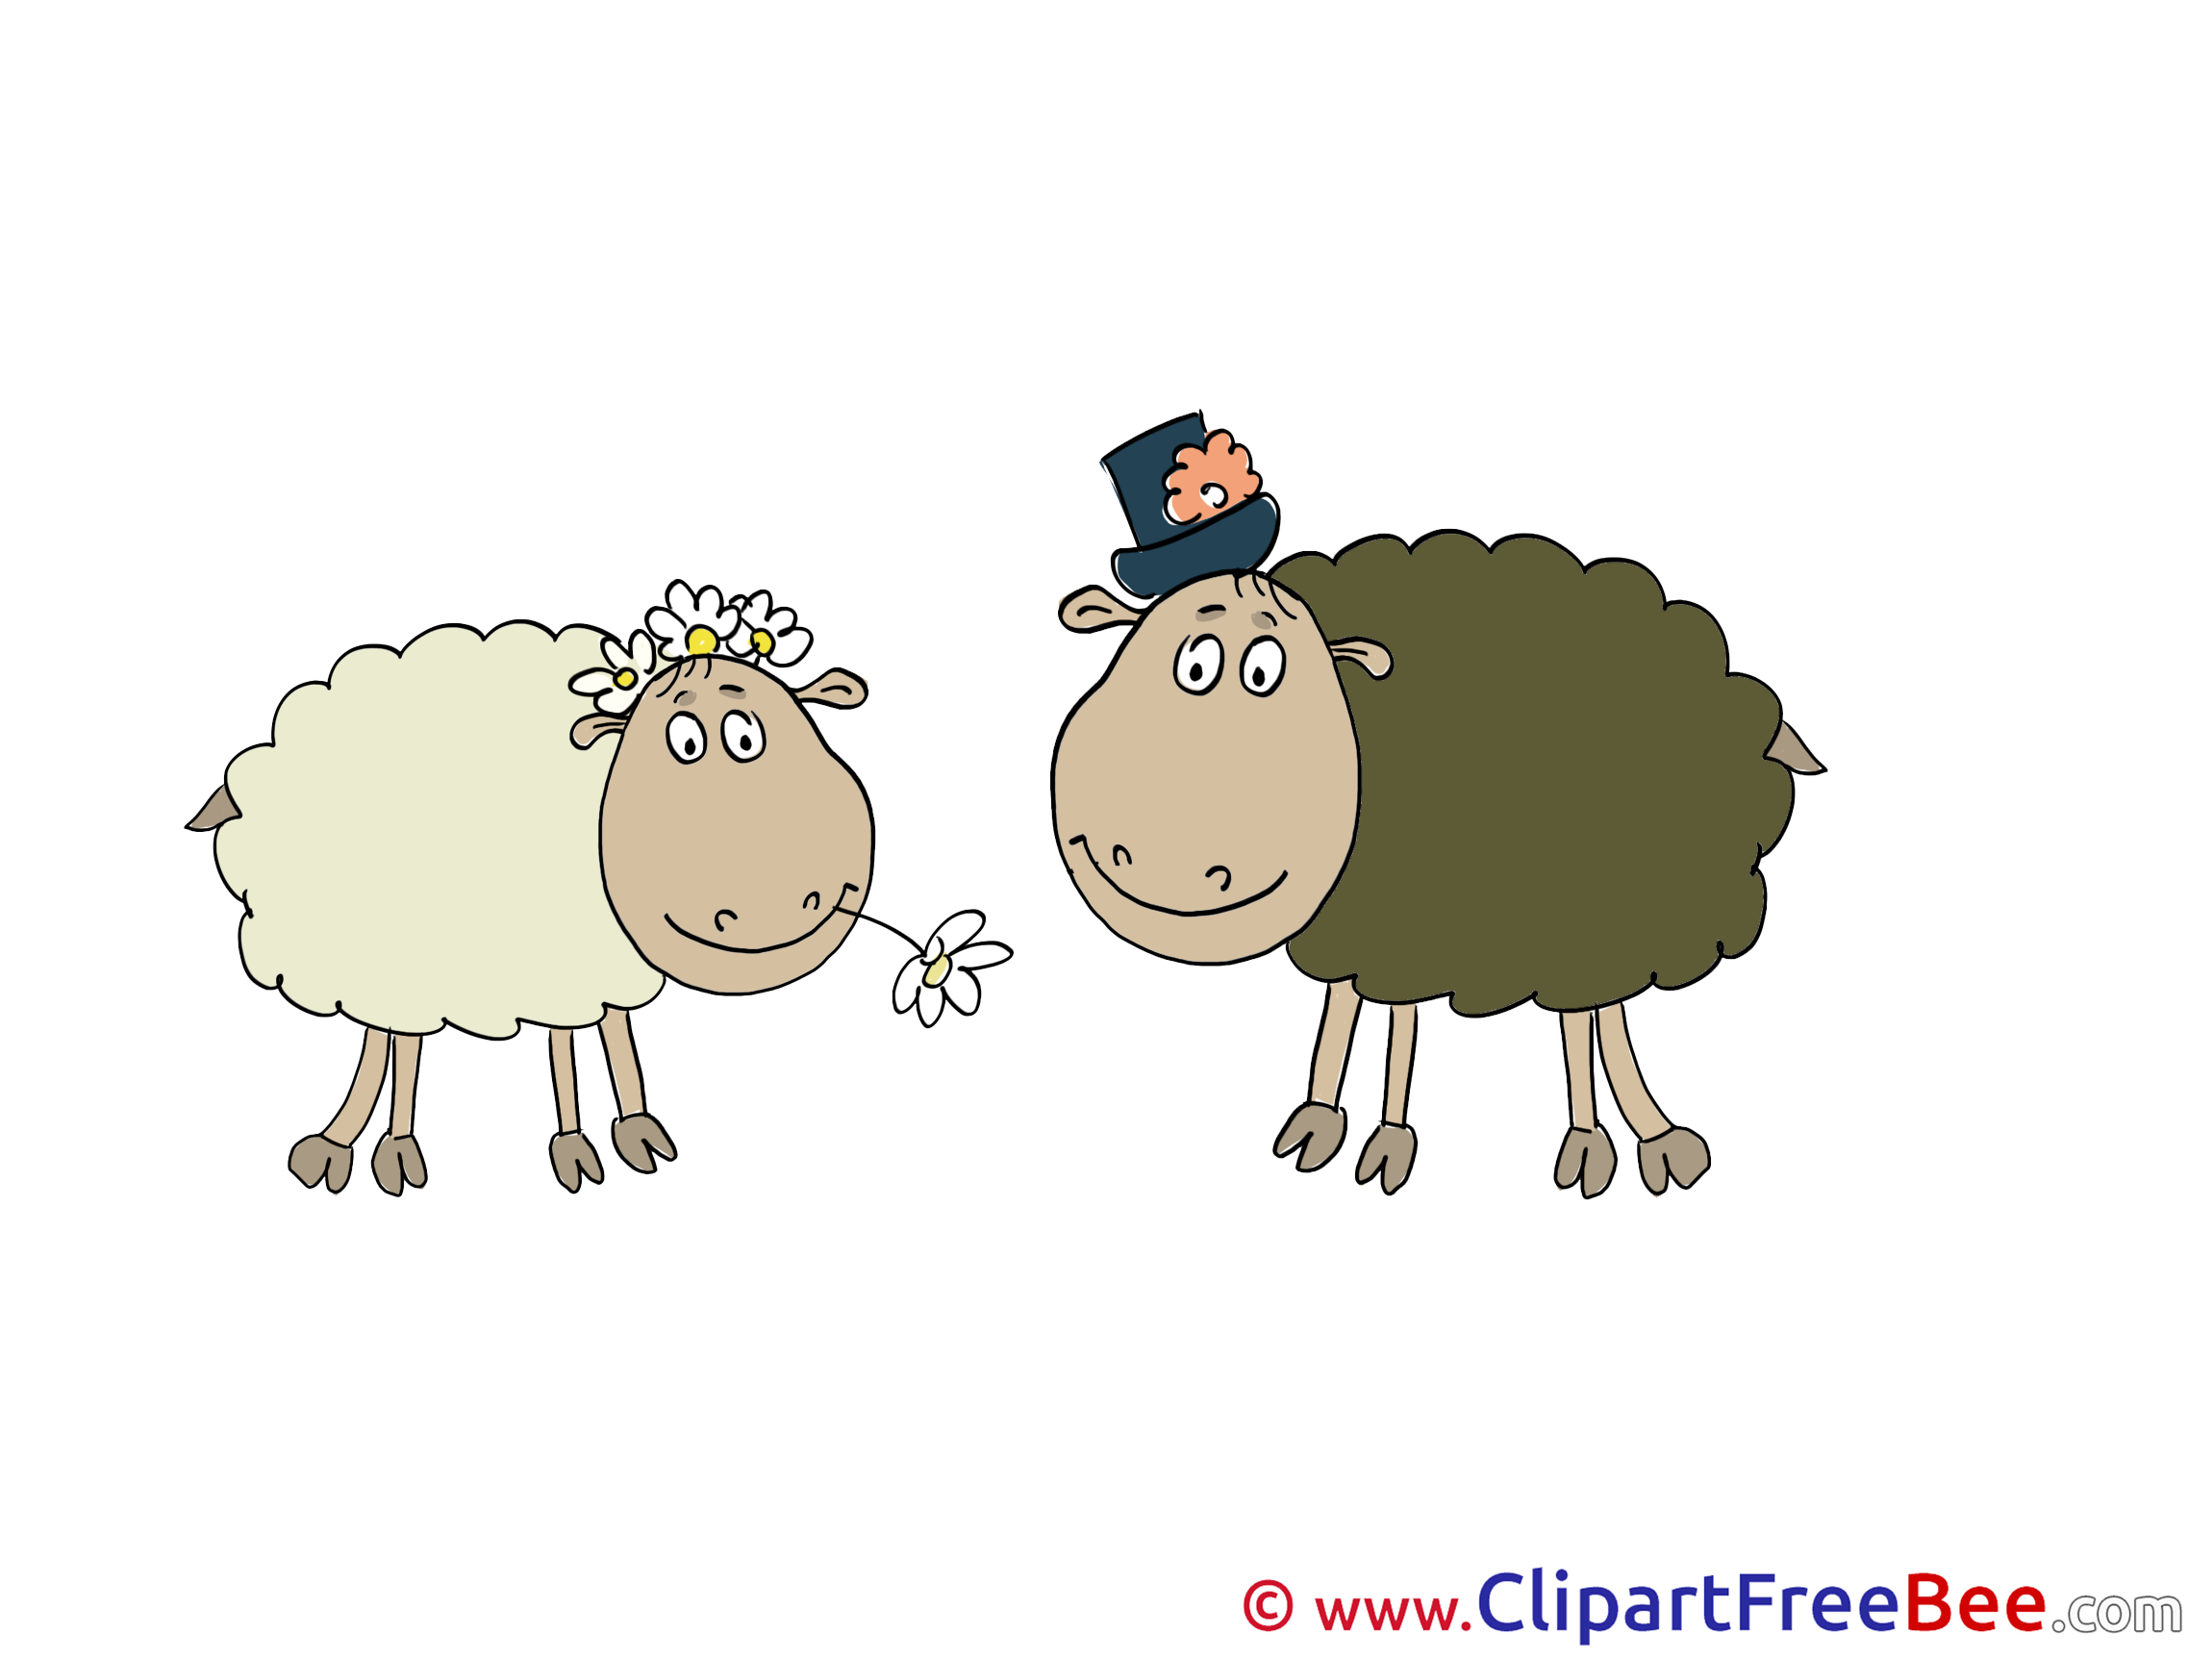 Sheeps Images download free Cliparts